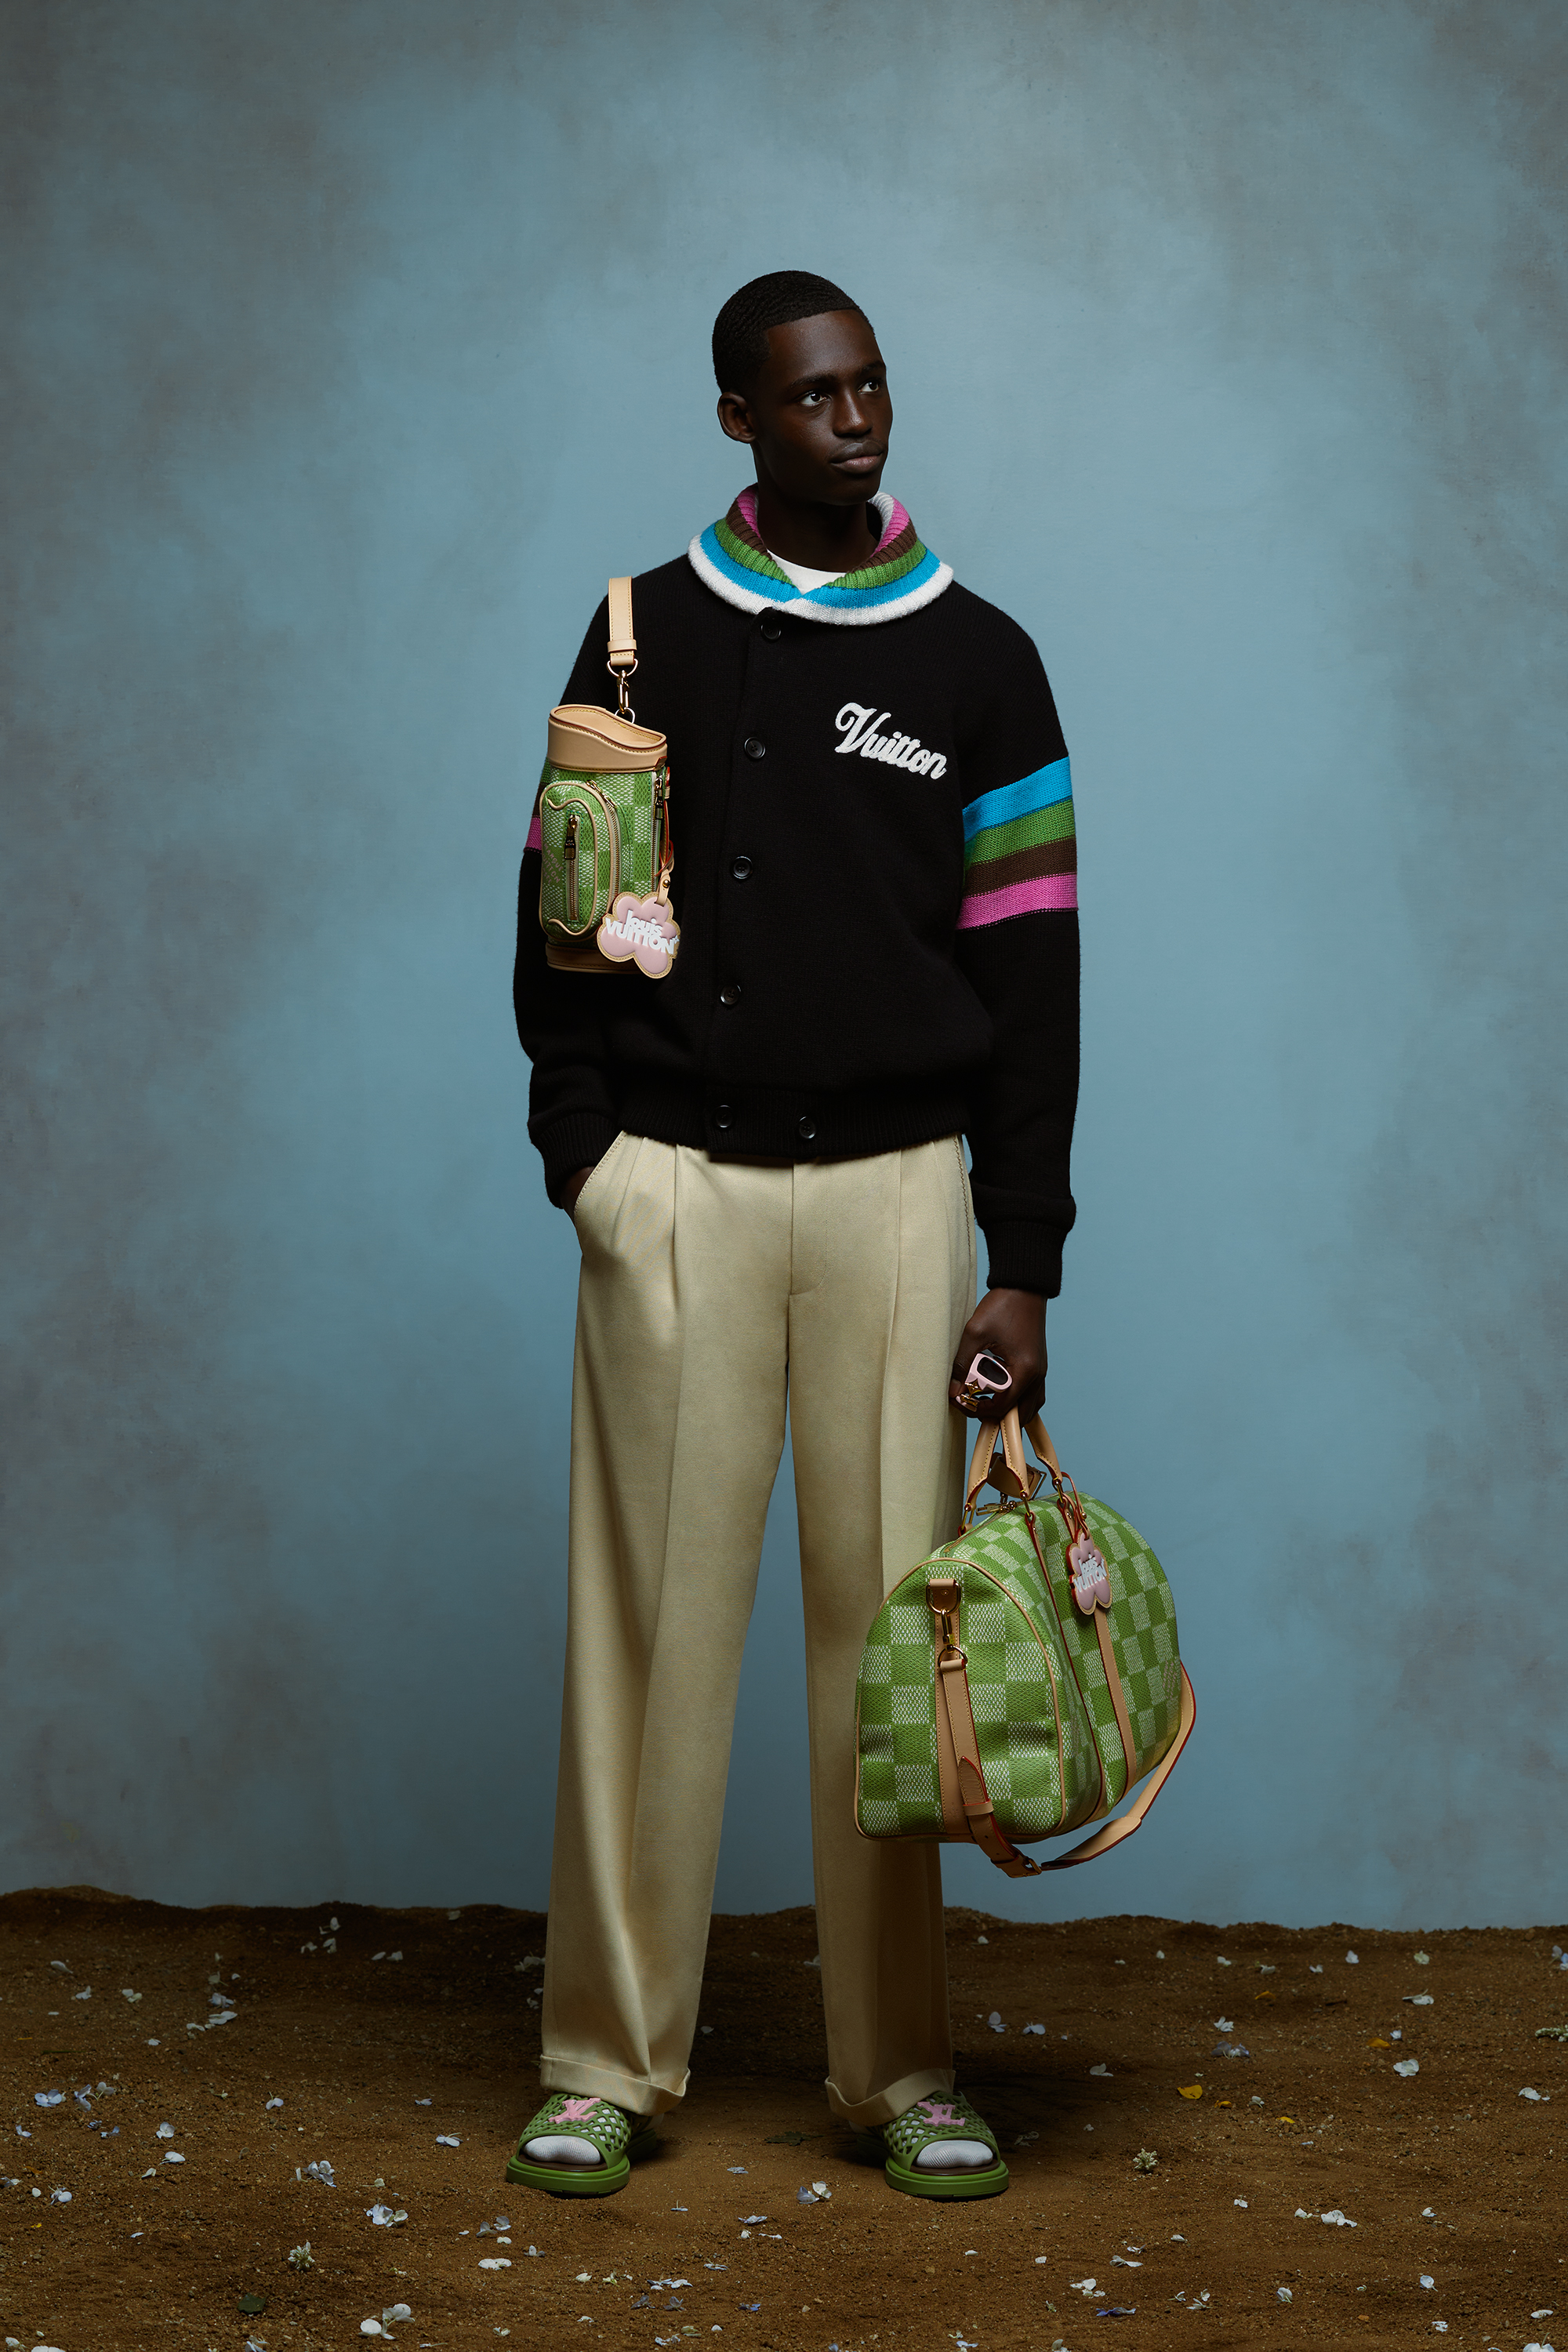 Elegant person in a varsity jacket, striped sweater, and trousers holding two stylish bags